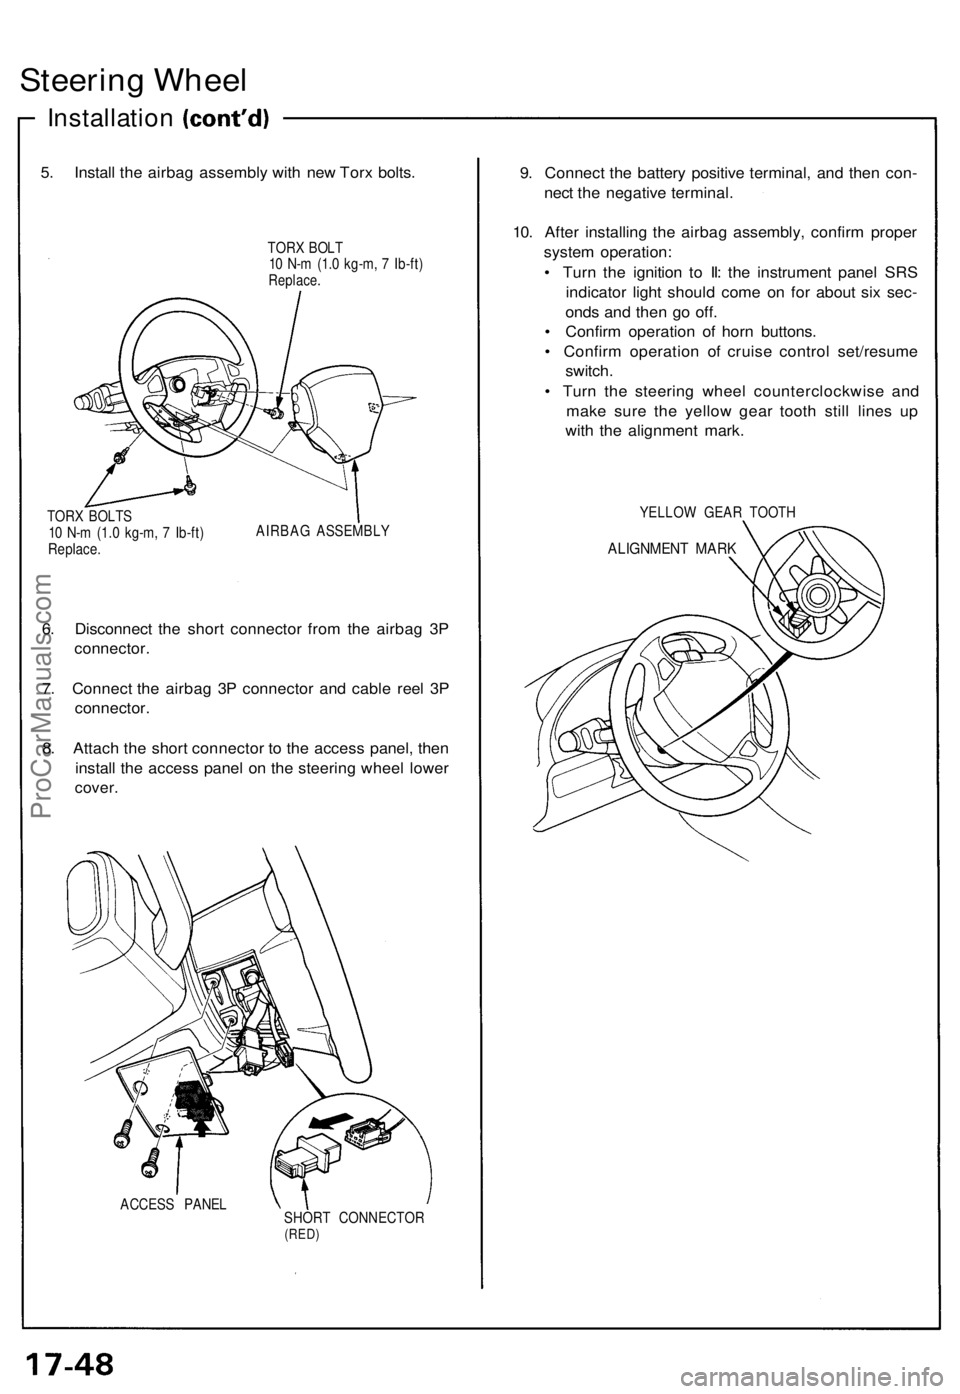 ACURA NSX 1991  Service Repair Manual 
Steering Wheel

Installation

5. Install the airbag assembly with new Torx bolts.

TORX BOLT

10 N-m (1.0 kg-m, 7 Ib-ft)

Replace.

TORX BOLTS

10 N-m (1.0 kg-m, 7 Ib-ft)

Replace. 
AIRBAG ASSEMBLY

